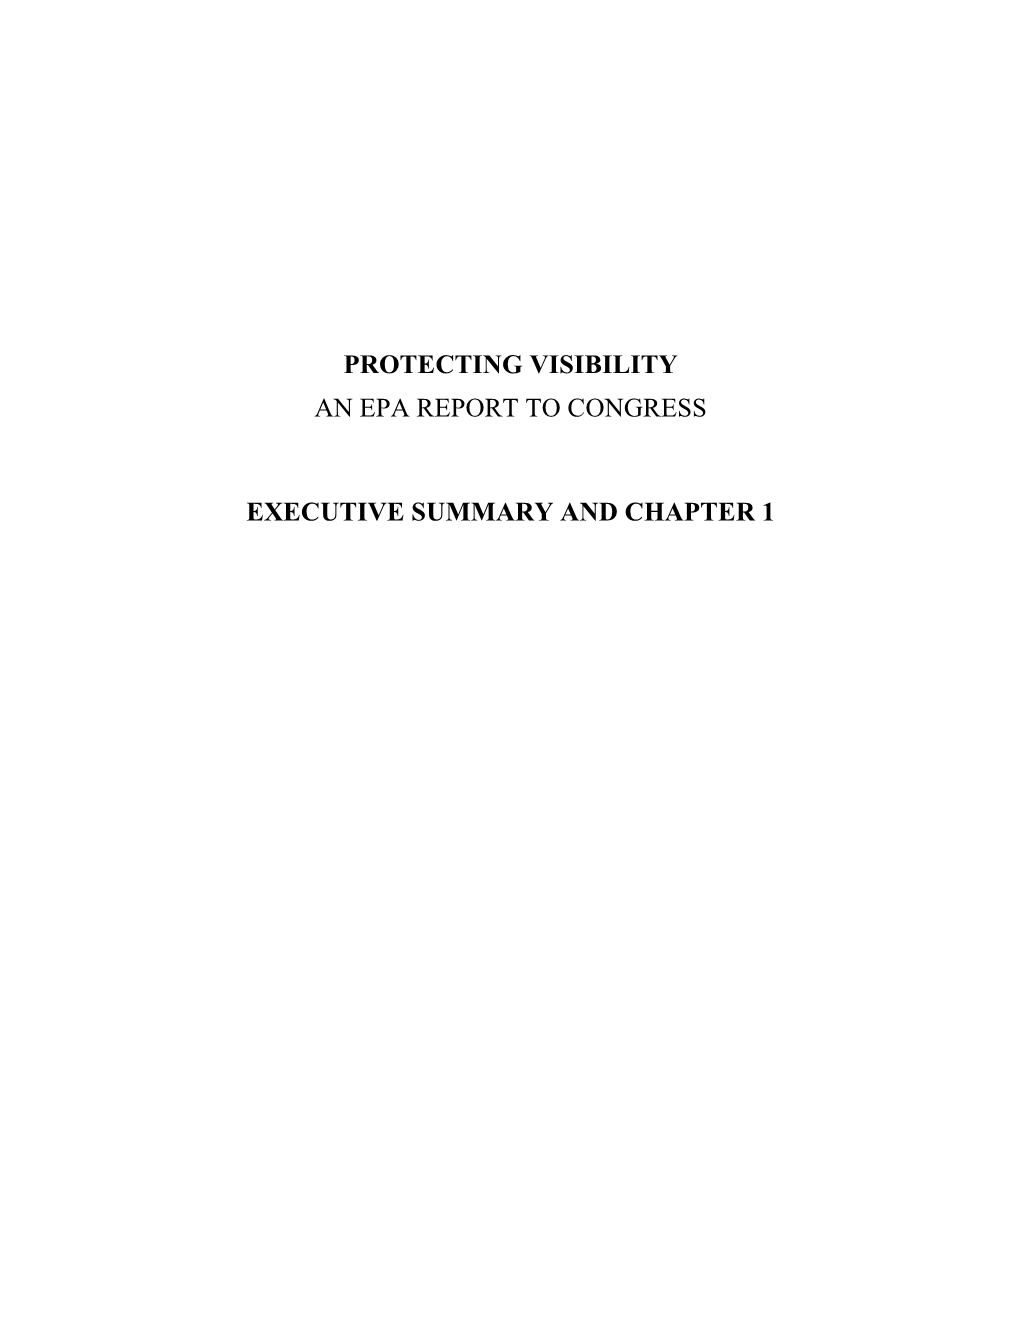 Protecting Visibility: an EPA Report to Congress